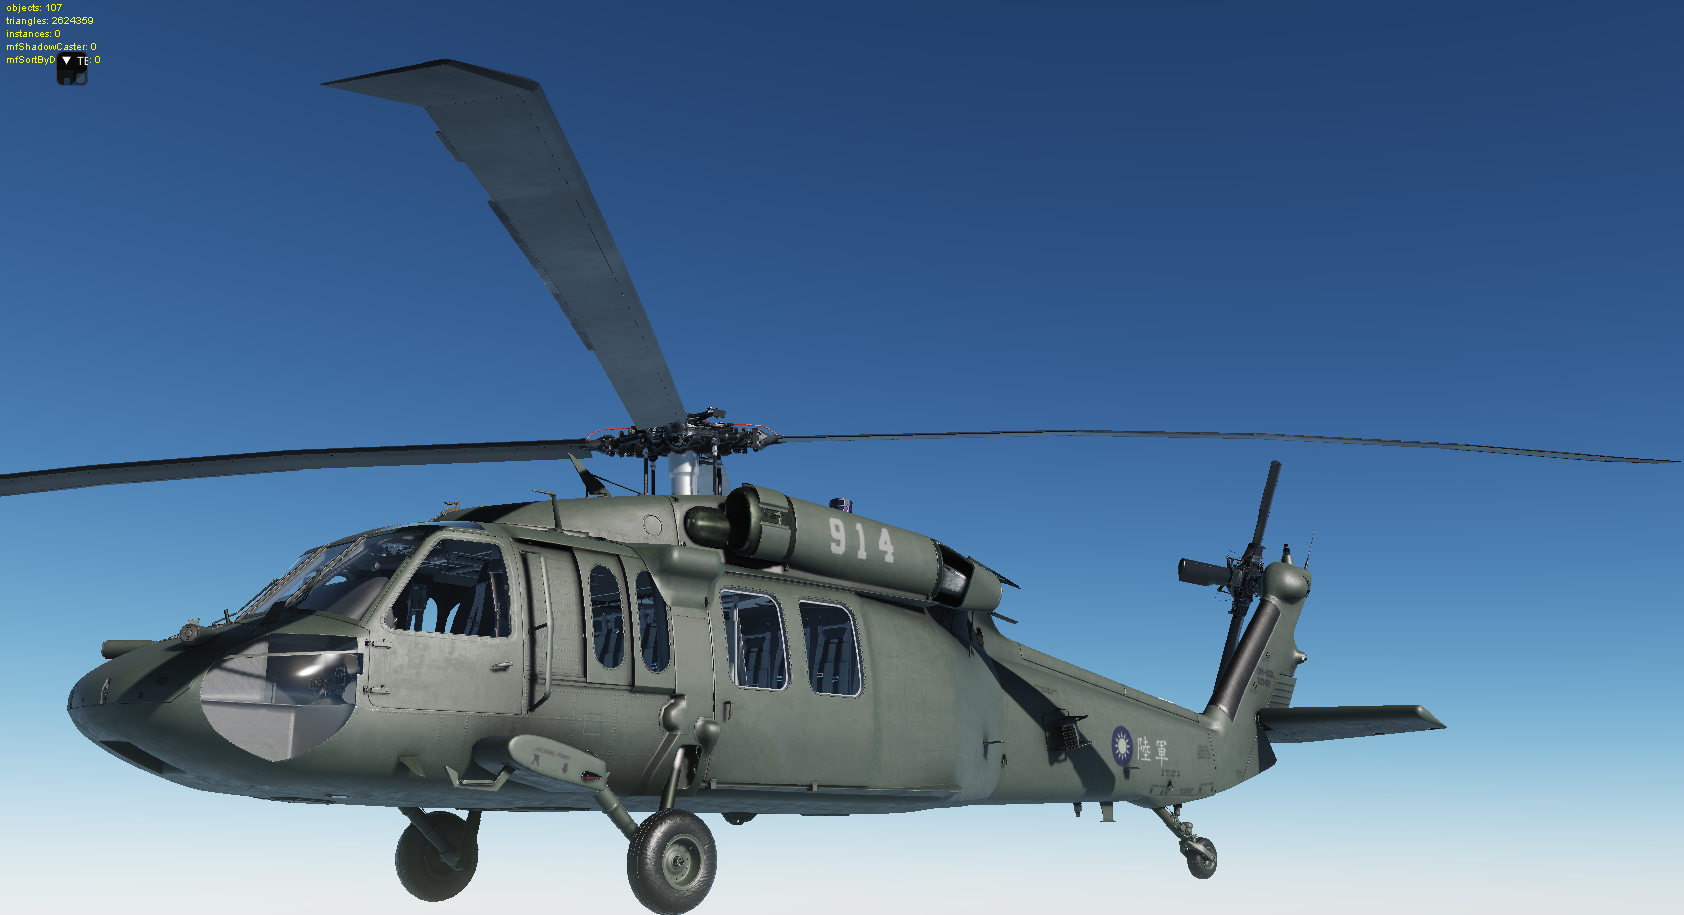 Republic of China Army(Taiwanese Army) skin for UH-60L Mod